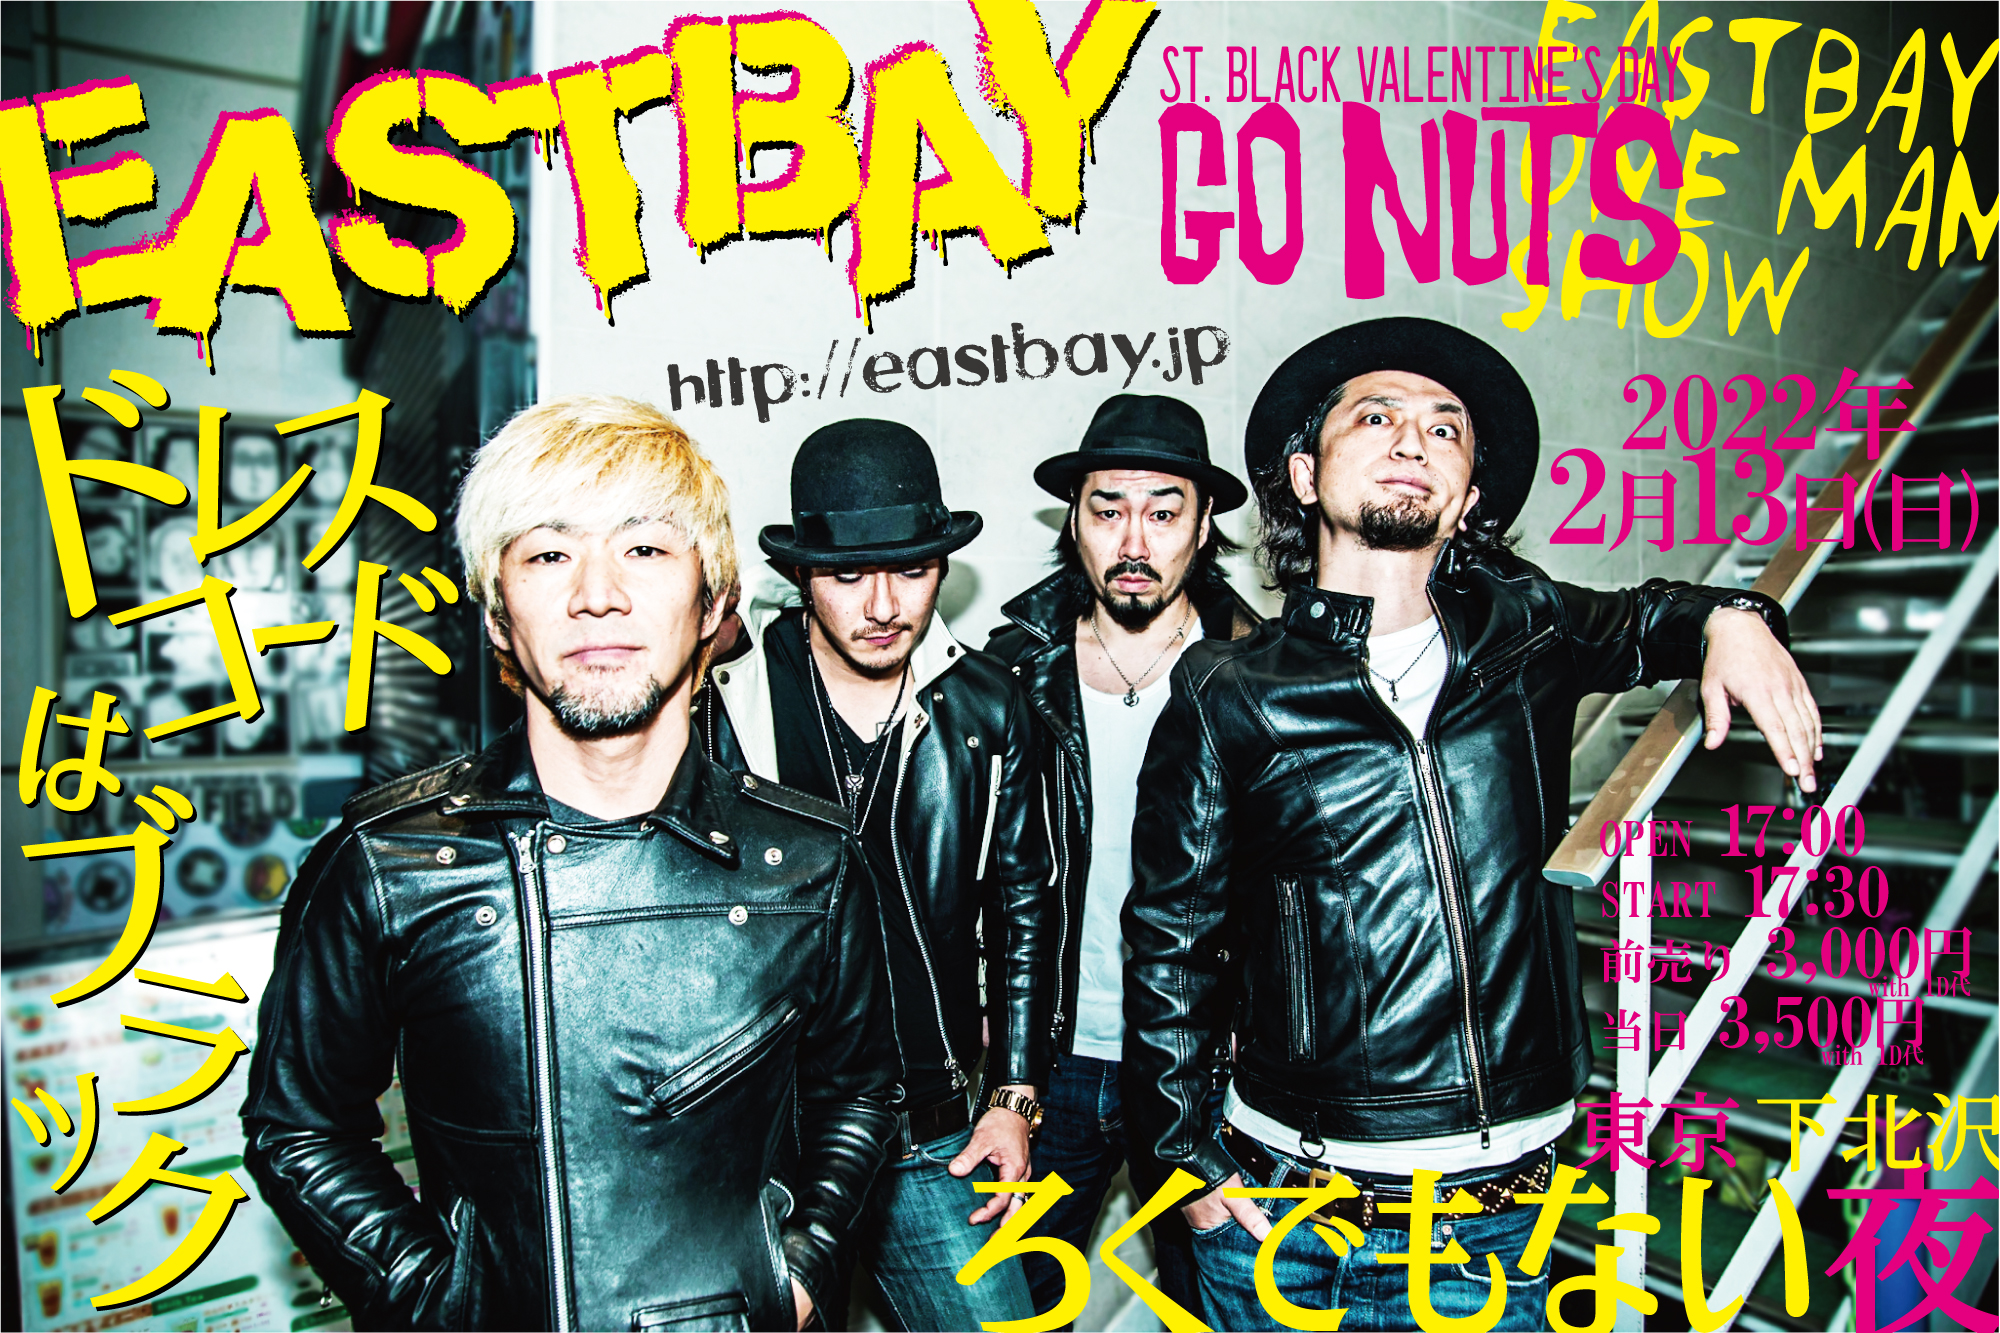 St. Black Valentine’s Day【Go Nuts】EASTBAY ONE MAN SHOW!の写真